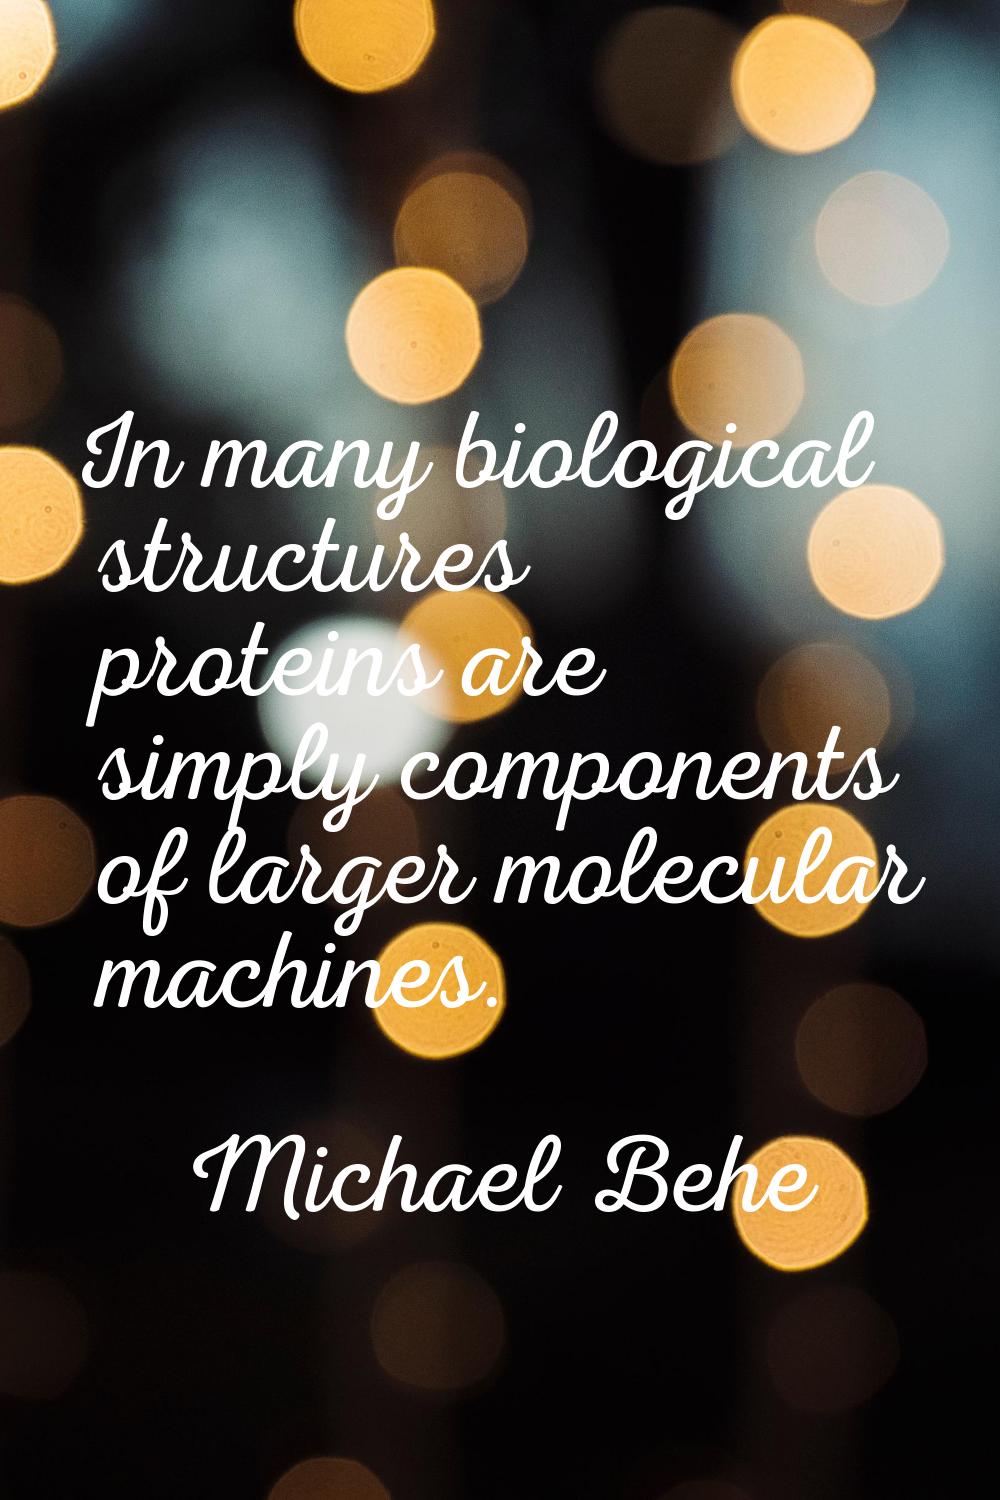 In many biological structures proteins are simply components of larger molecular machines.